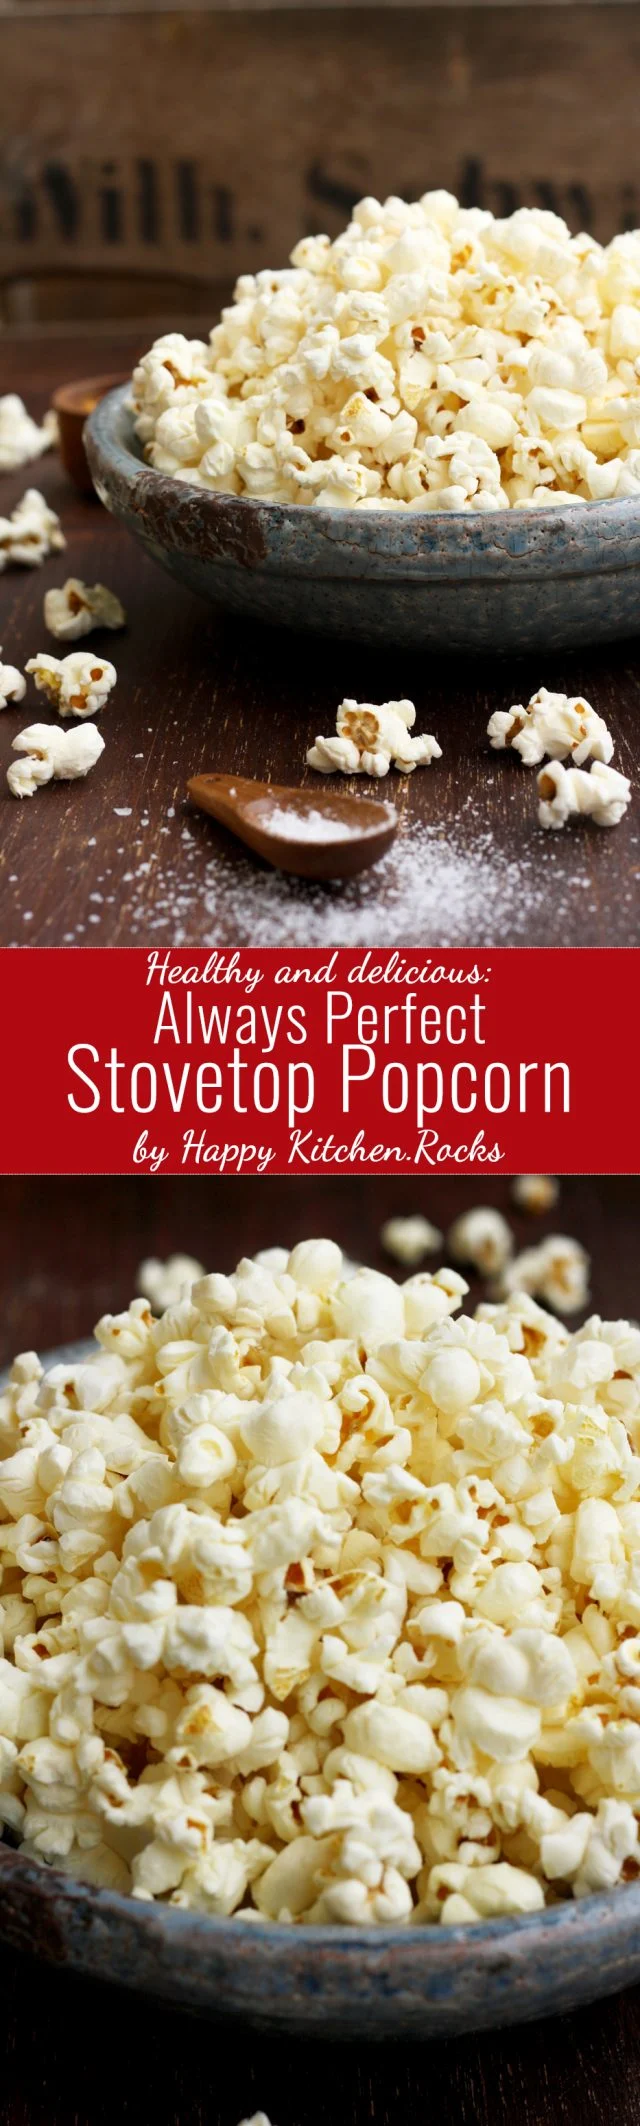 Stovetop popcorn makes for a great healthy snack ready within minutes! With this easy recipe your stovetop popcorn will always come out perfectly popped!